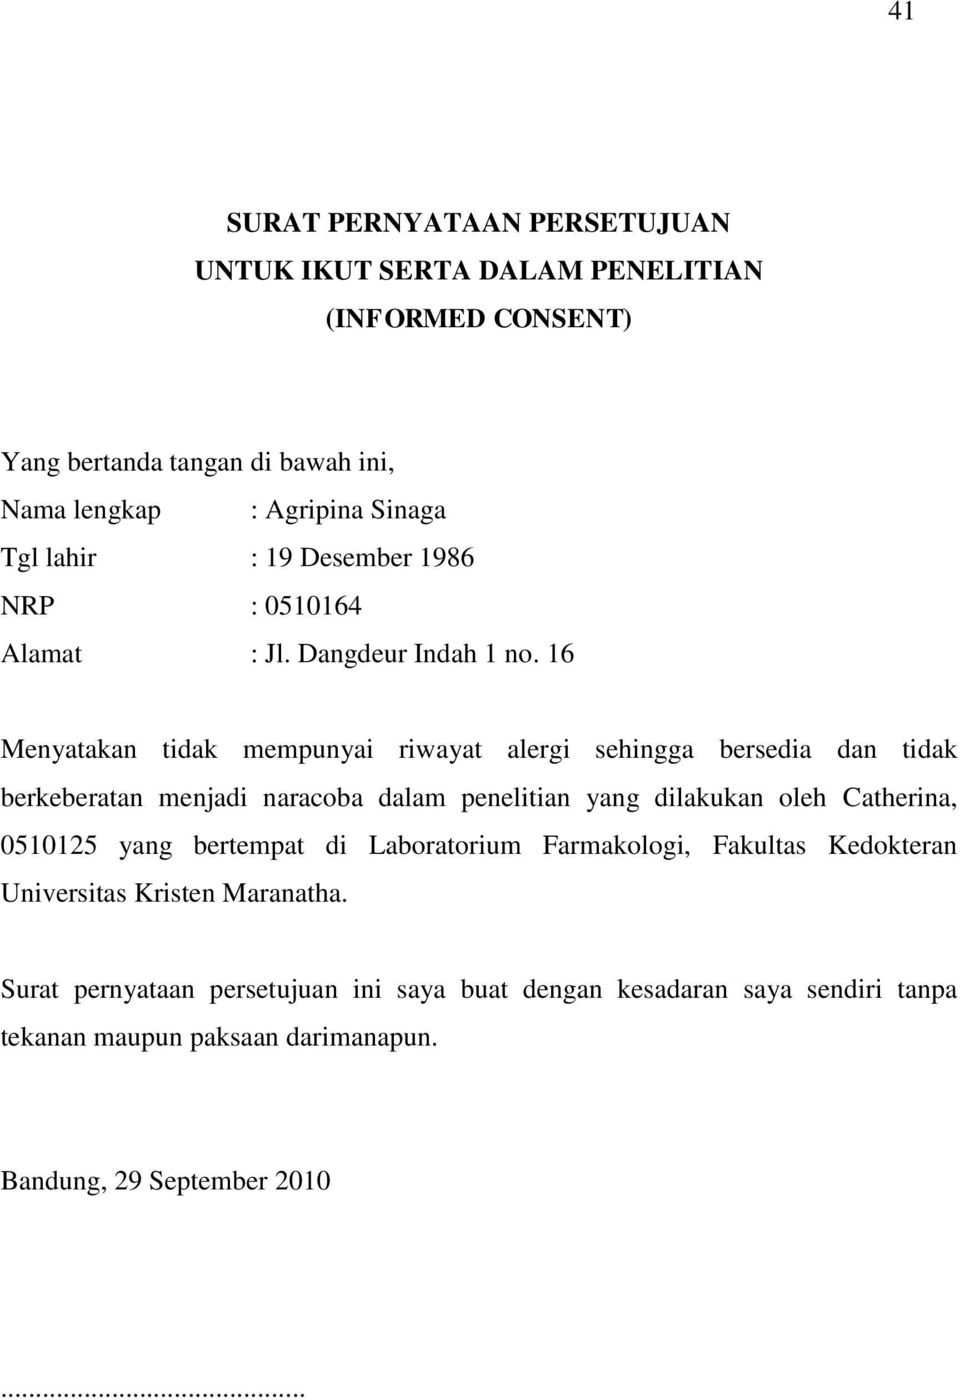 Download Informed Consent Contoh Nomer 16